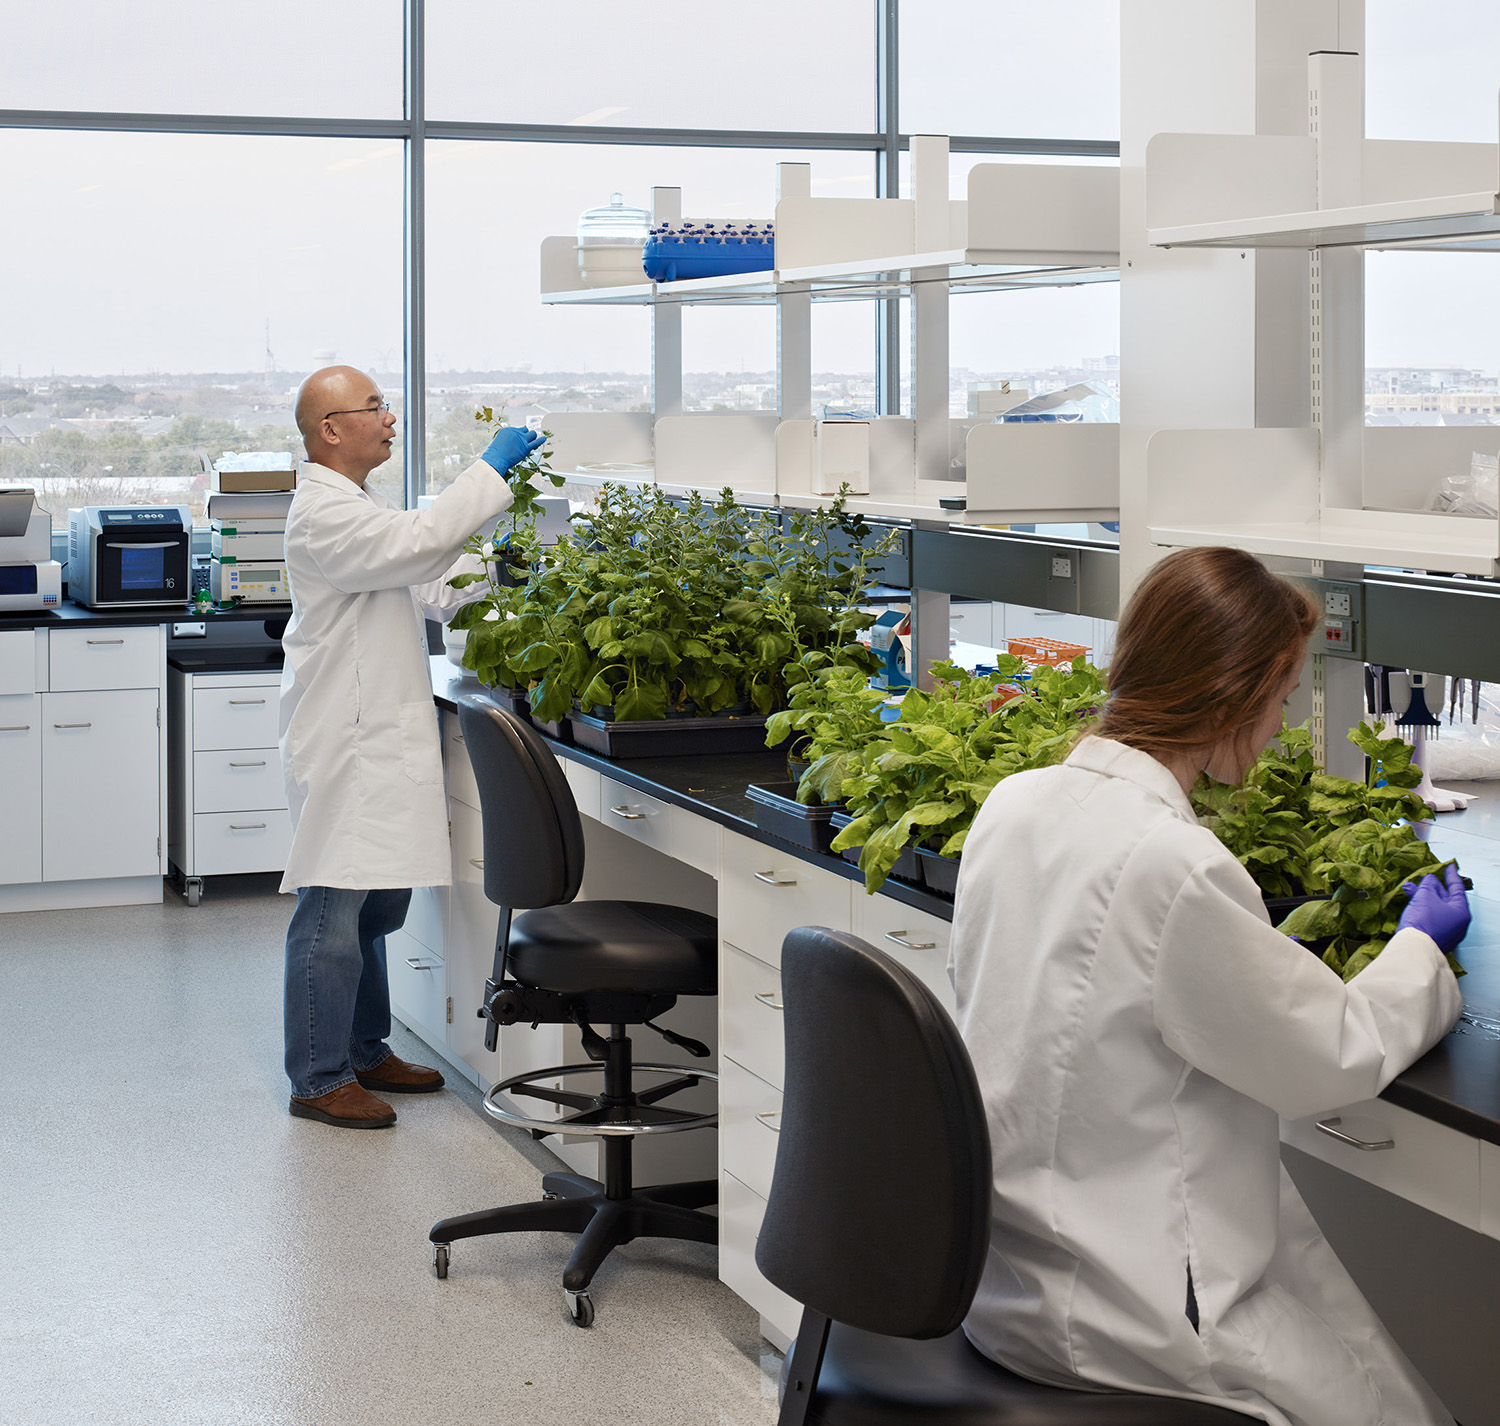 Scientists in lab with plants